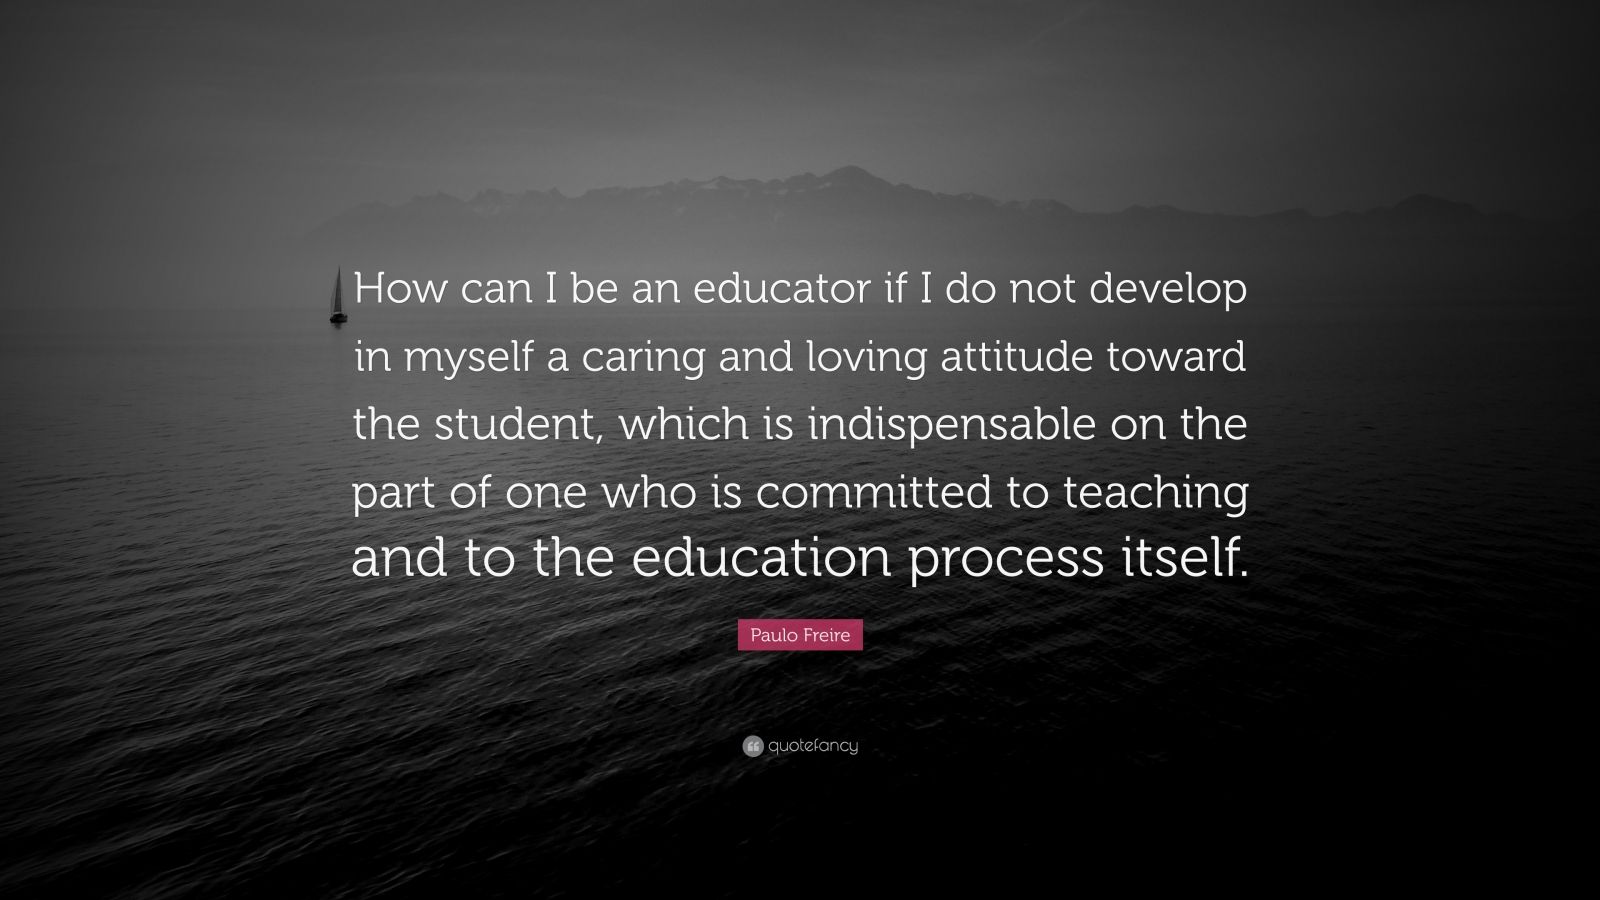 Paulo Freire Quote: “How can I be an educator if I do not develop in